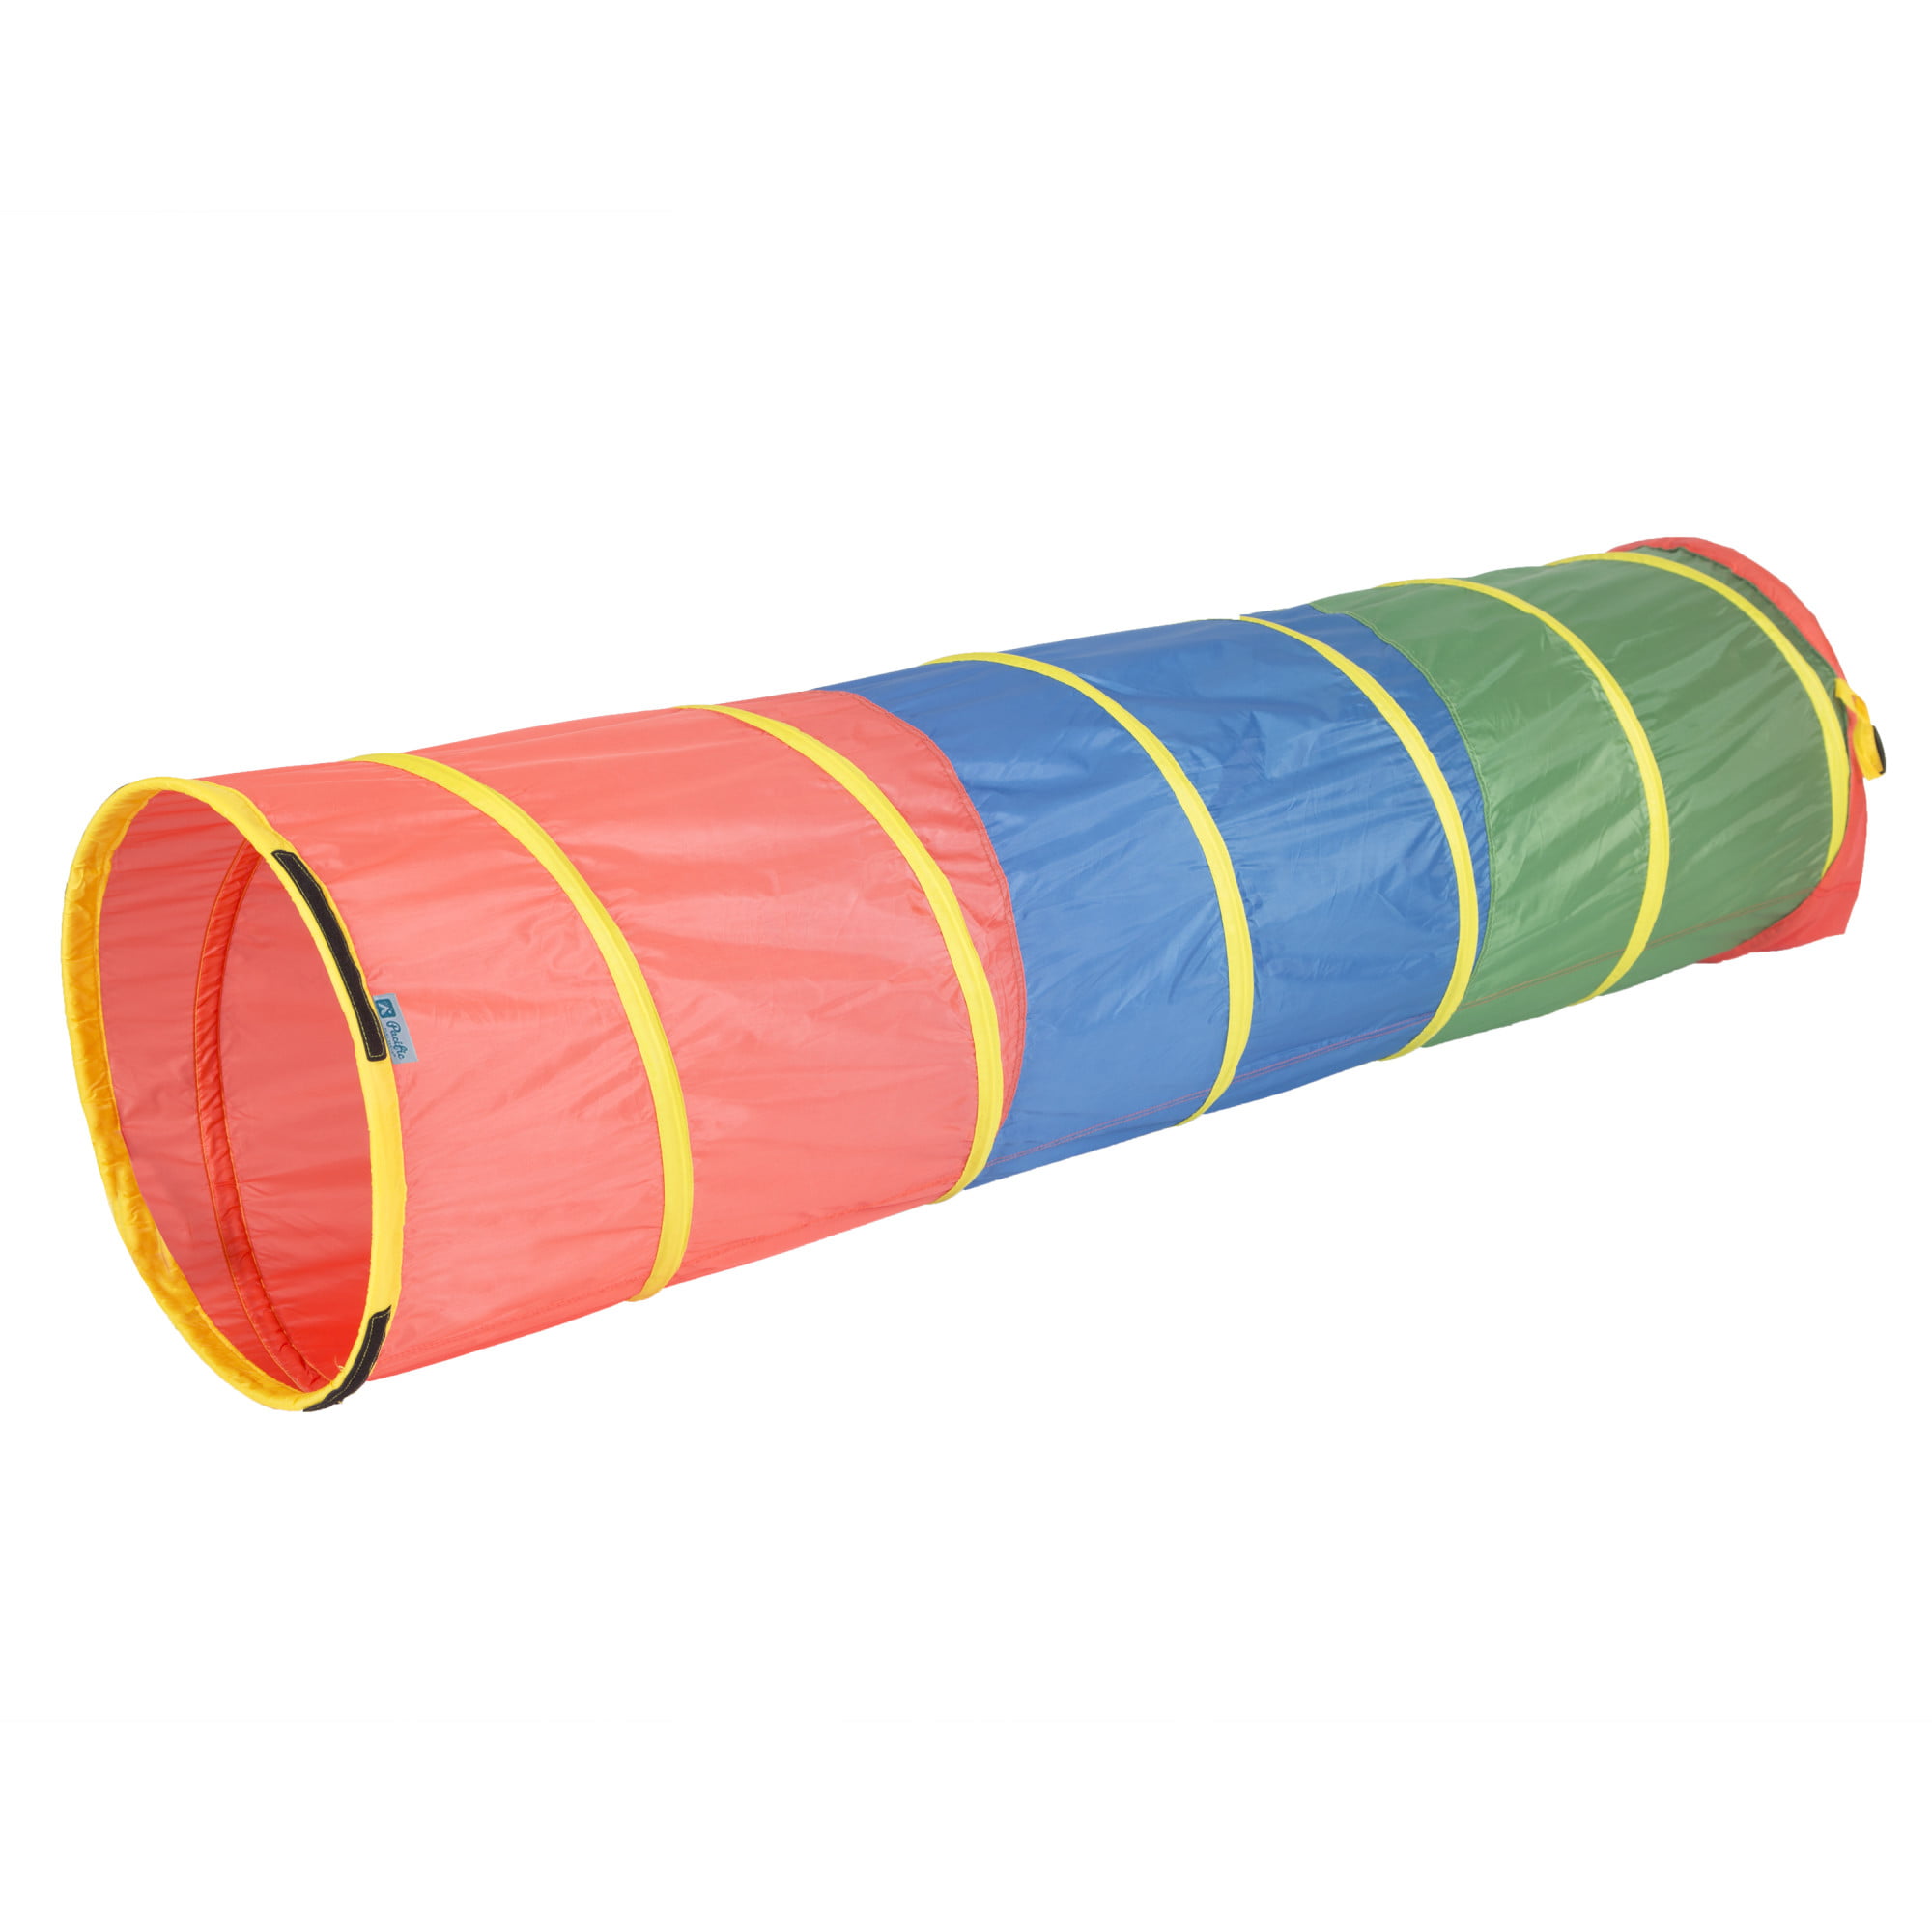 6' Pacific Play Find Me Indoor/Outdoor Tunnel $9.90 + Free Shipping w/ Walmart+ or FS on $35+